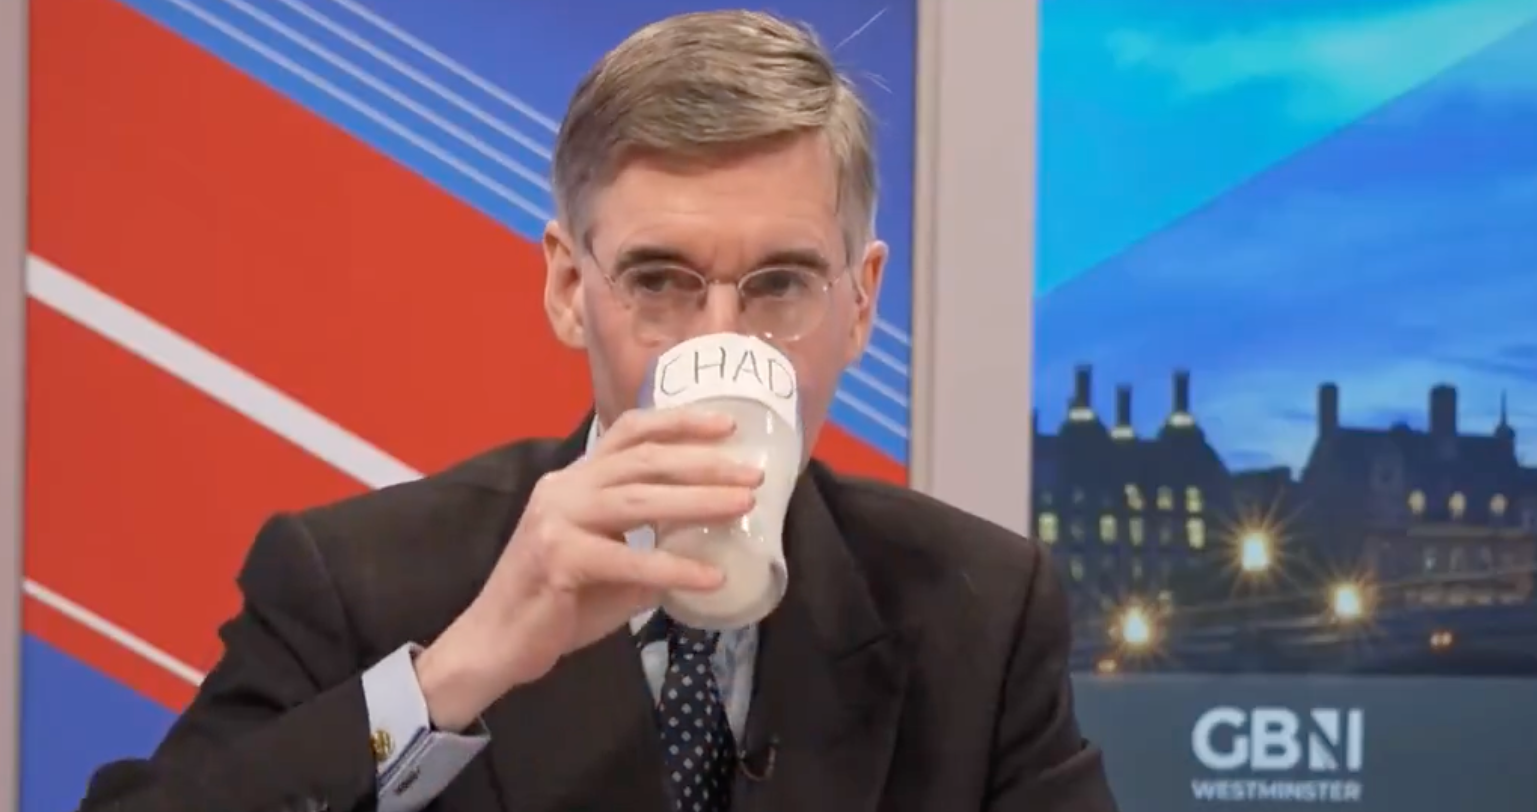 Jacob Rees-Mogg on GB News - two episodes of his programme ‘State of the Nation’ were found to have breached broadcasting rules